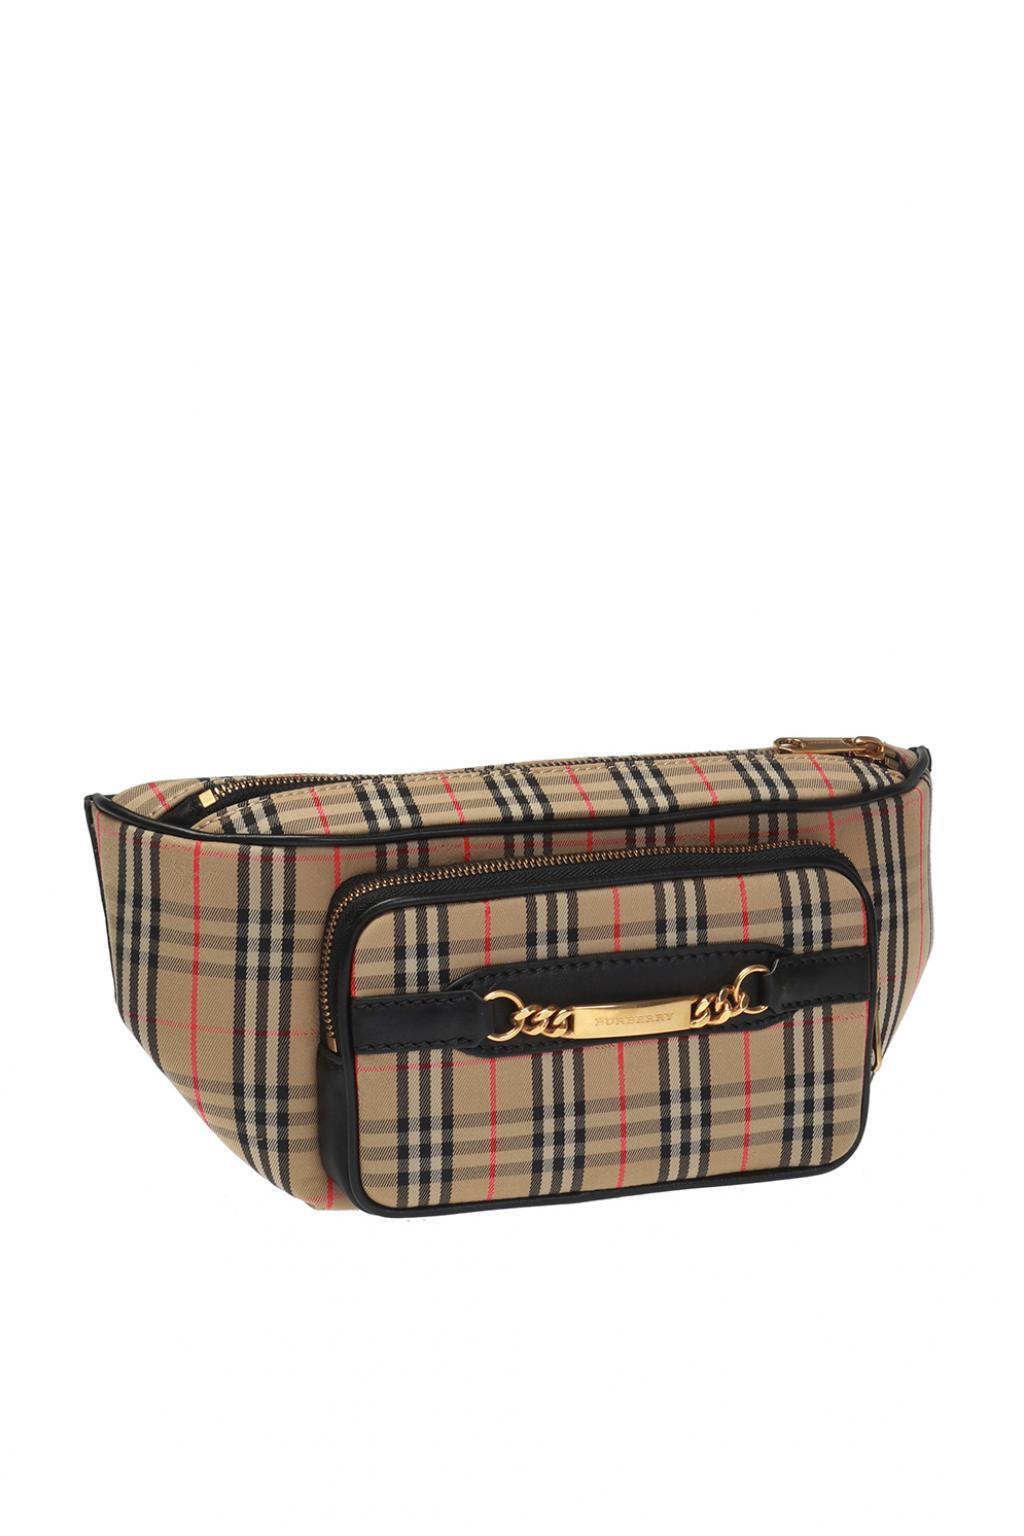 Burberry Waist Bag With A Plaid Pattern in Brown - Lyst